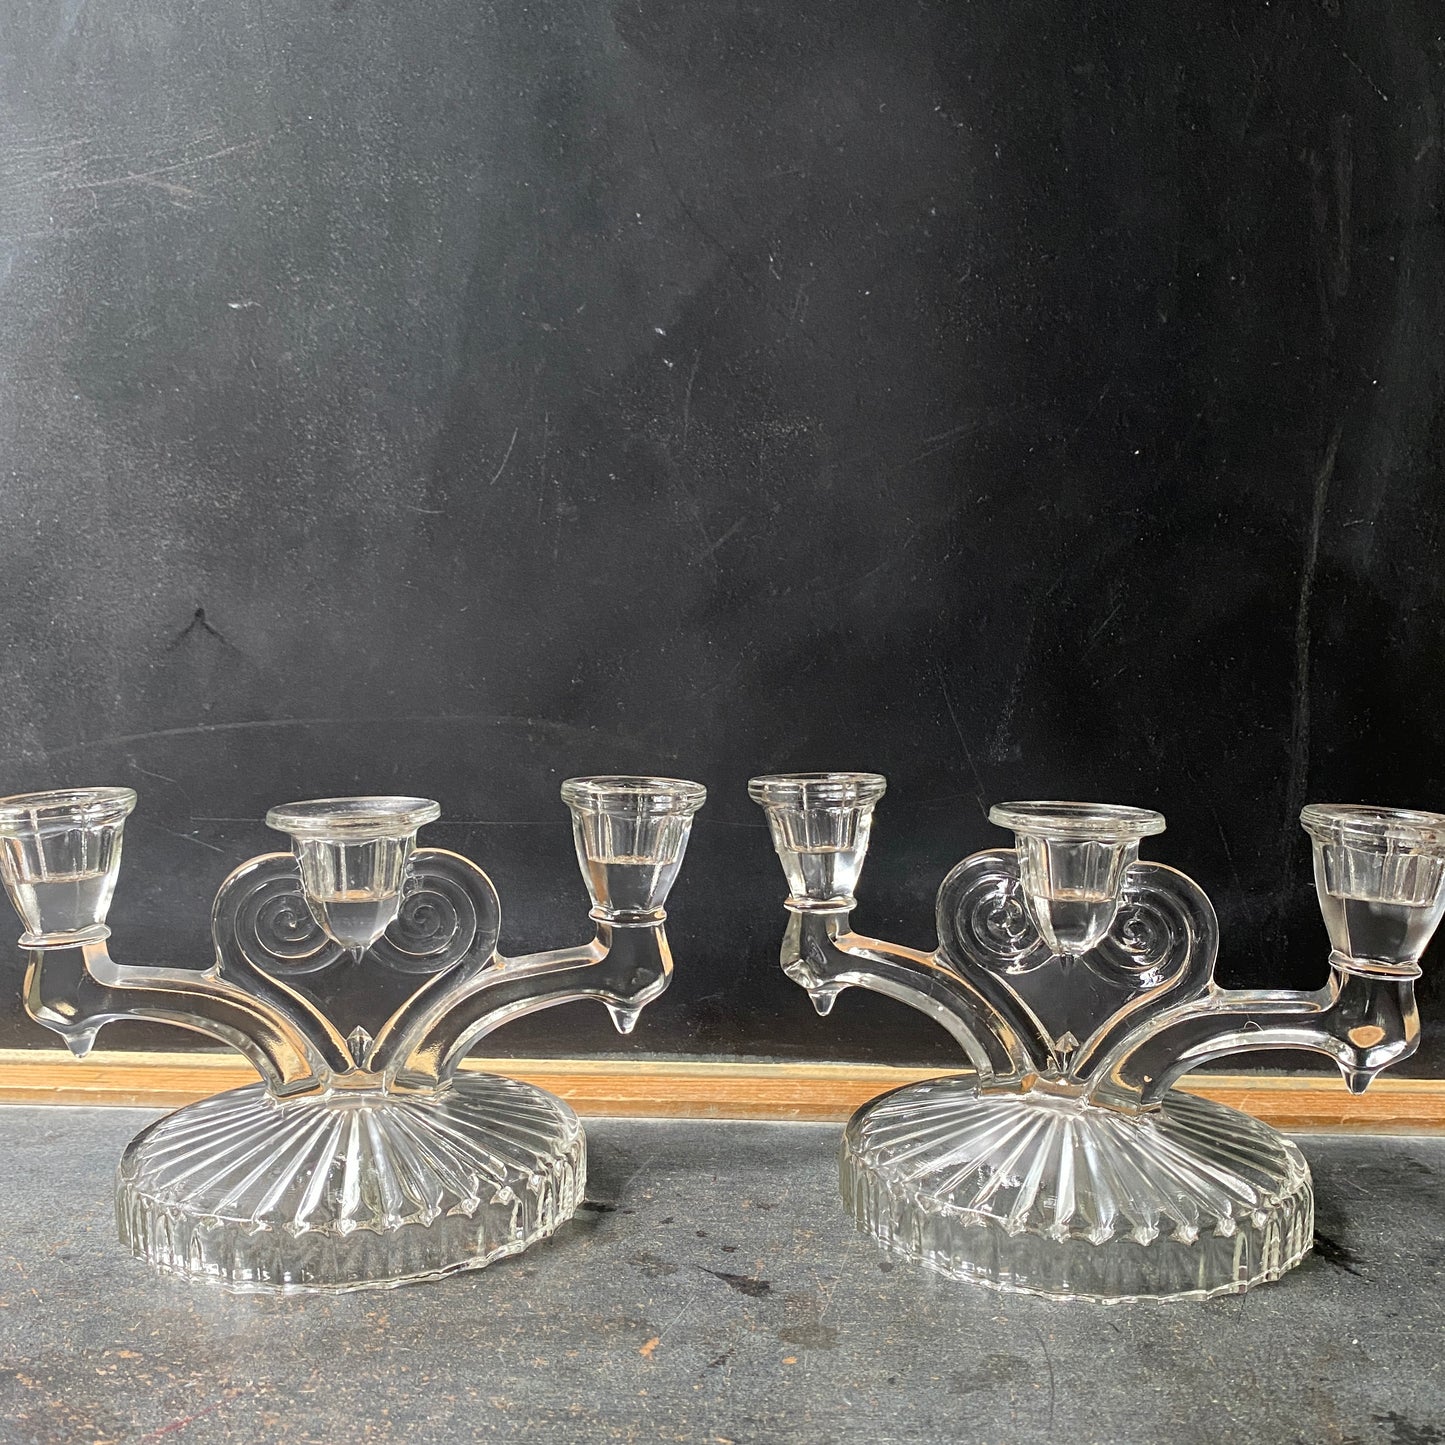 Vintage Pressed Glass Candleabra Set, Jeanette Cosmos Clear